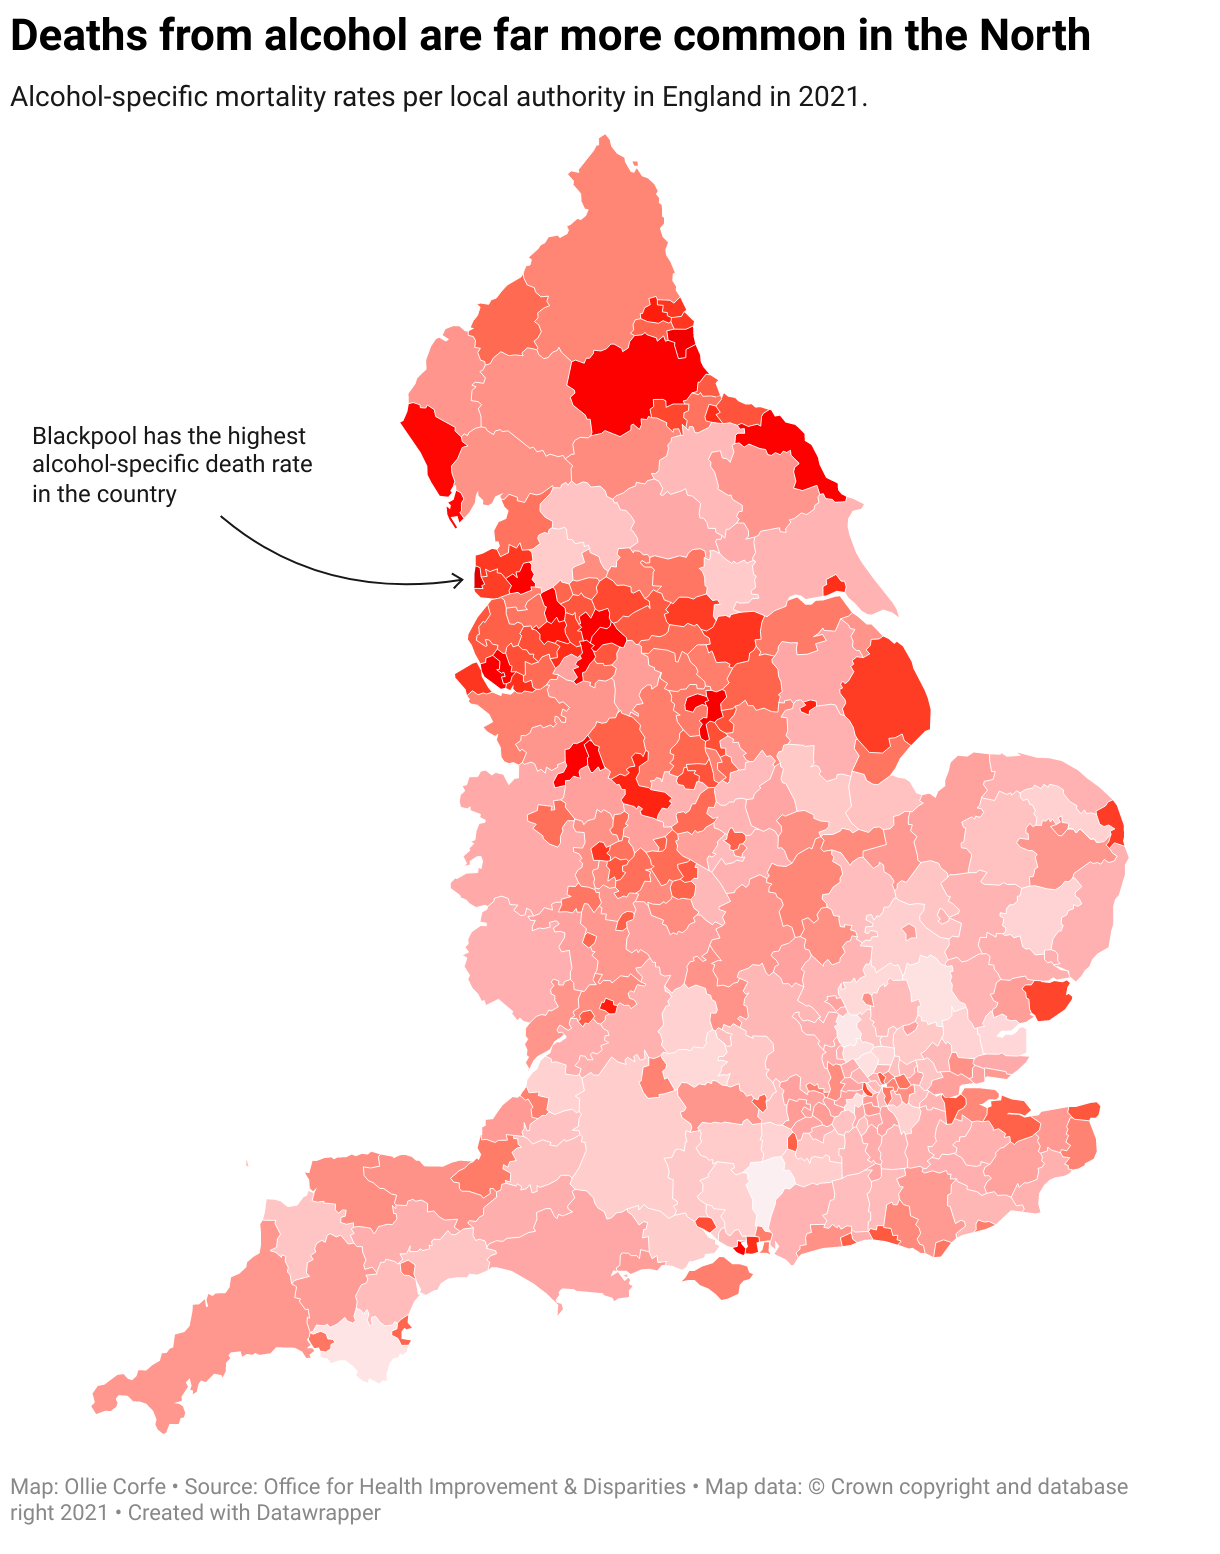 Map of England's local authorities coloured by alcohol-specific mortality rate.